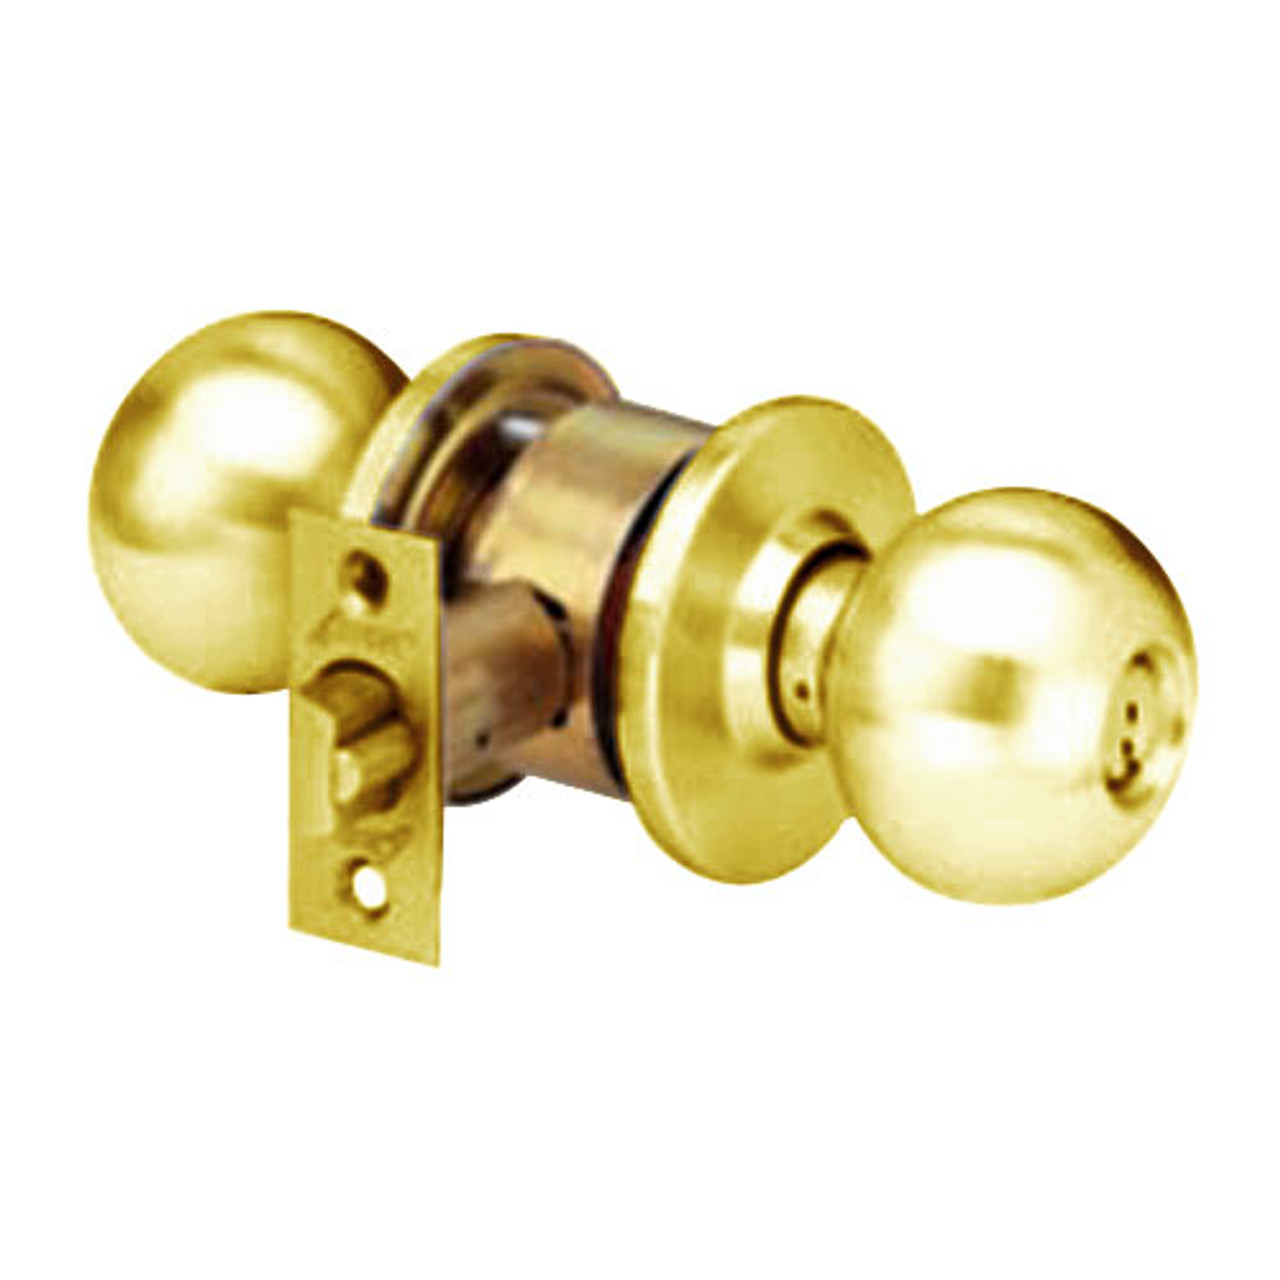 MK11-BD-05A Arrow Lock MK Series Cylindrical Locksets Single Cylinder for Entrance/Office with BD Knob in Antique Brass Finish